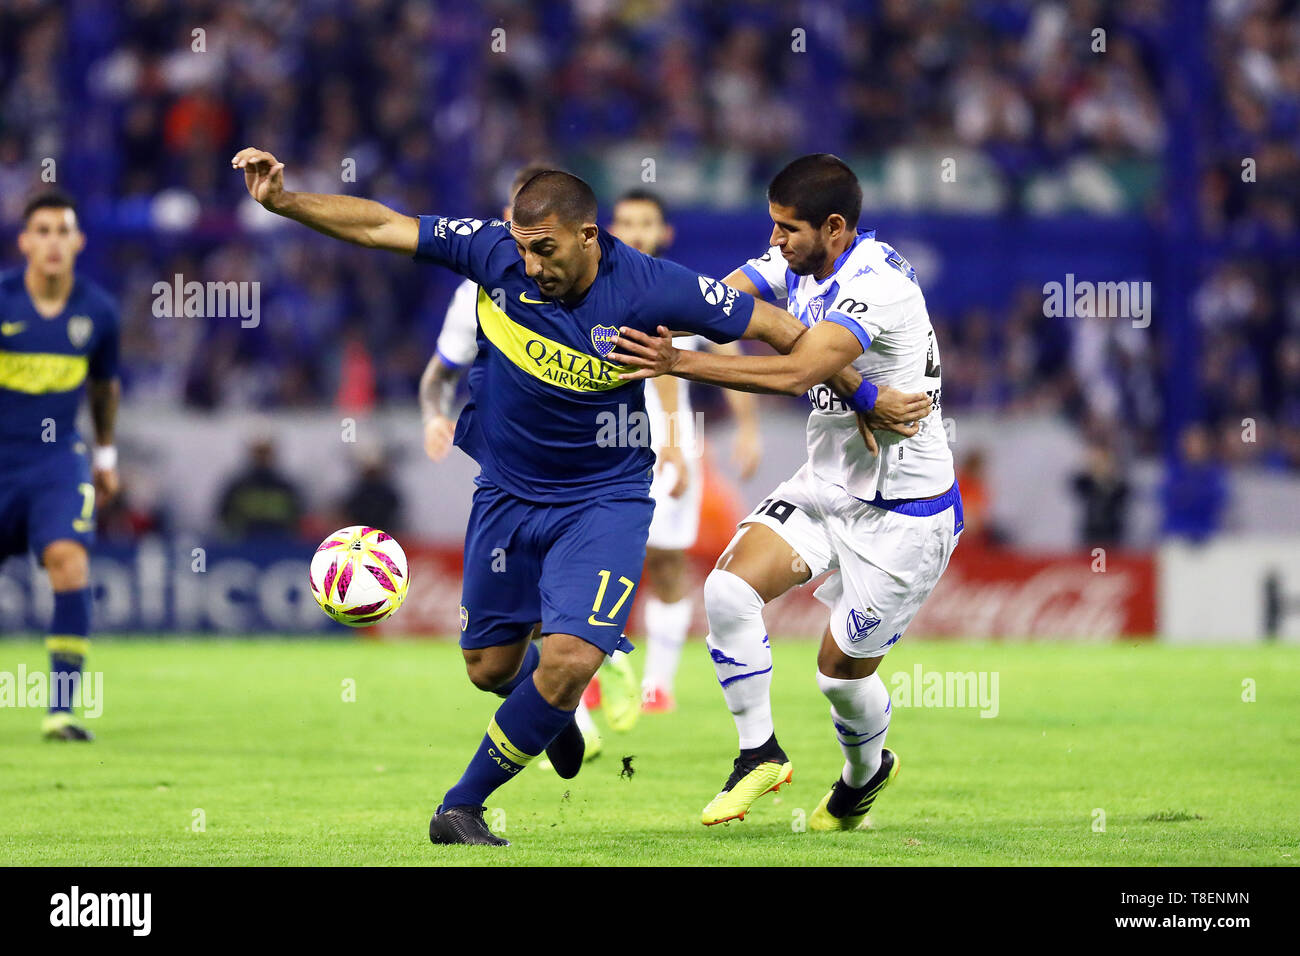 Buenos Aires, Argentina - May 12, 2019: Wanchope Avila (boca Juniors) fighting the ball against velez defense in Buenos Aires, Argentina Stock Photo